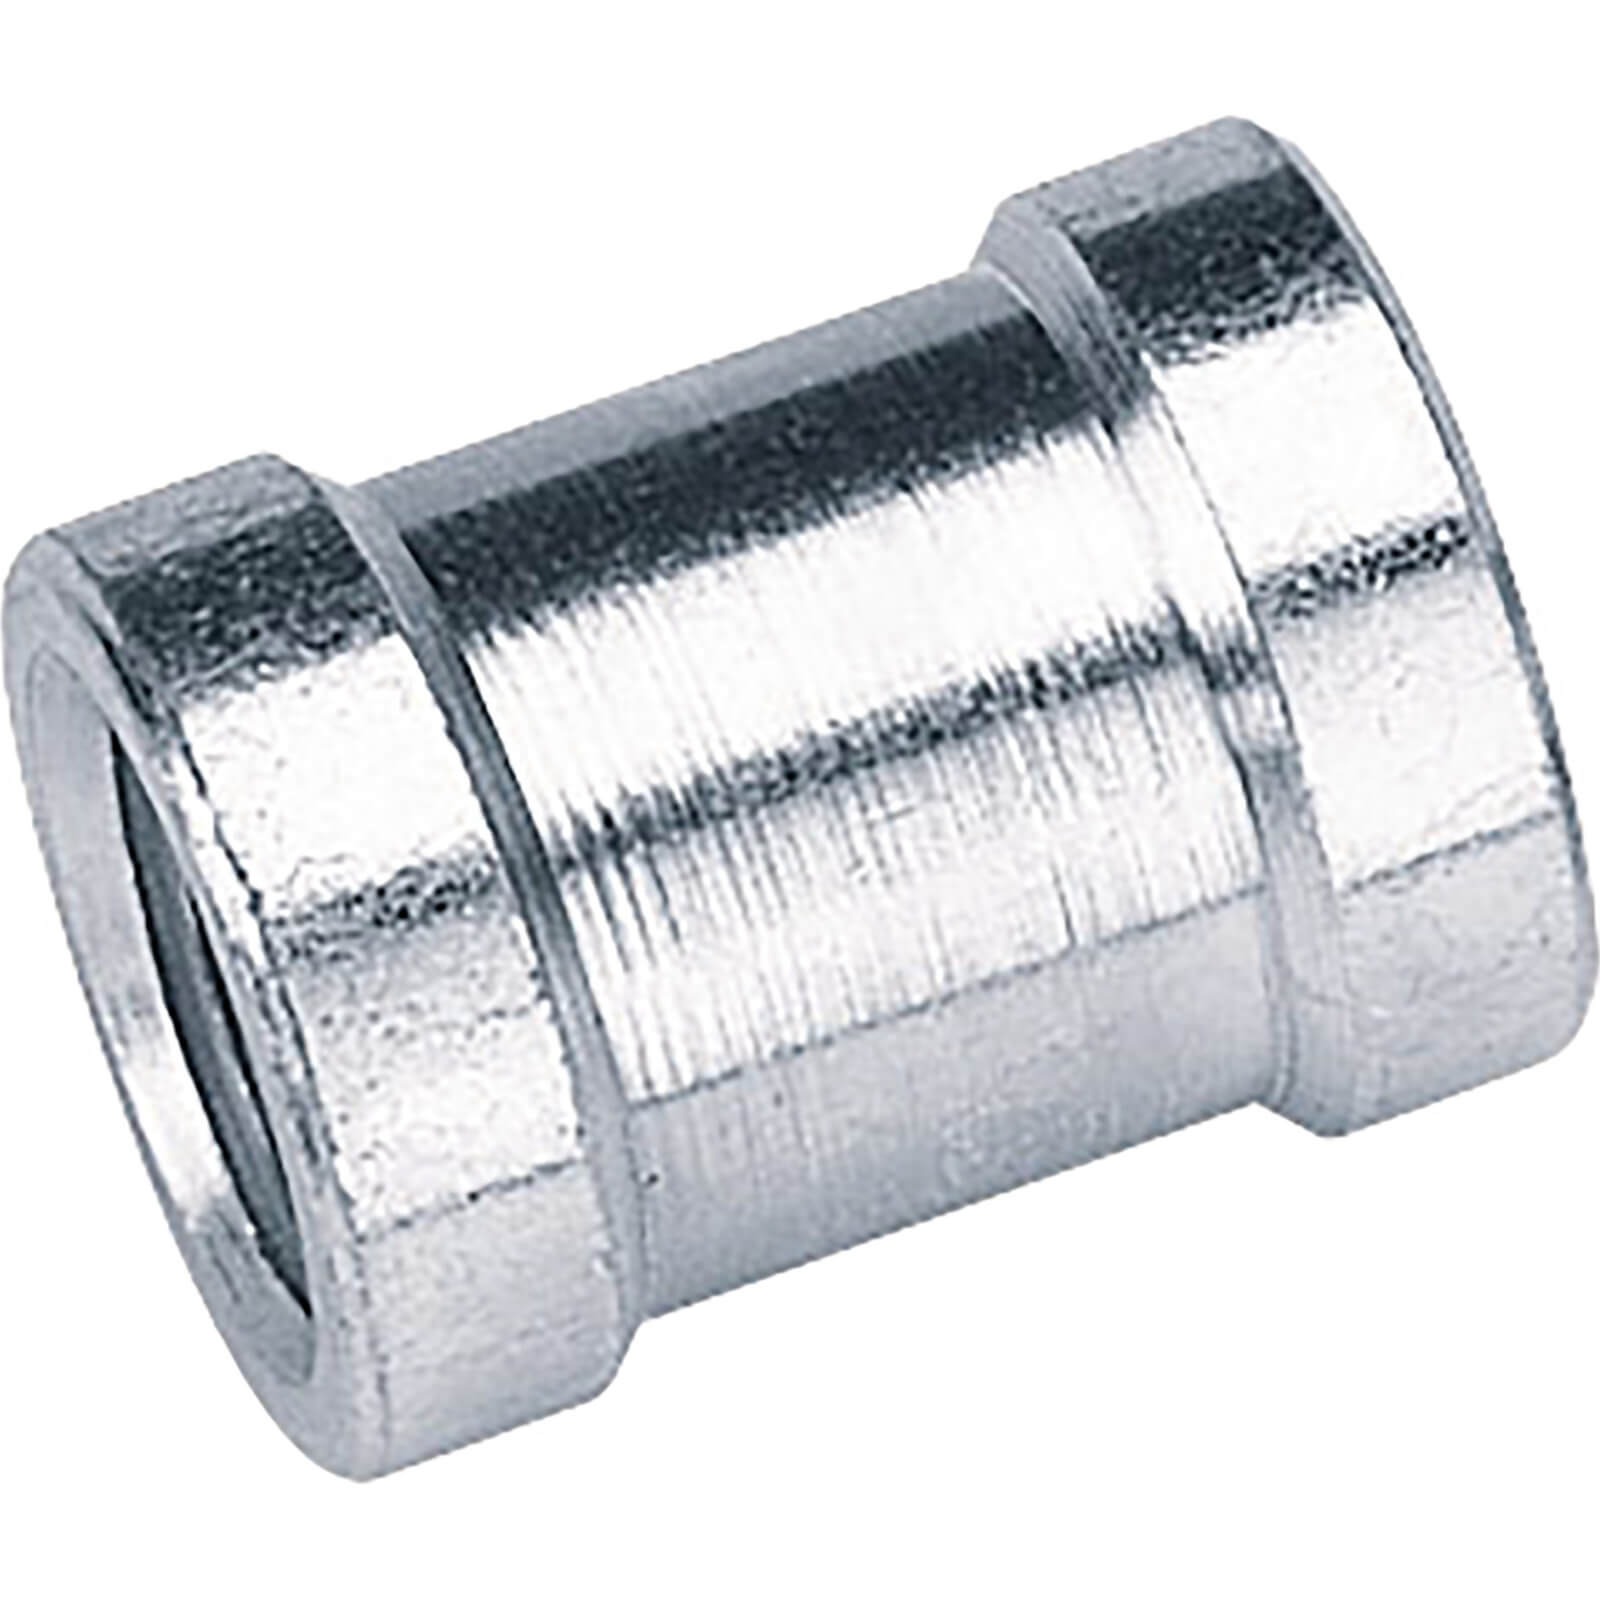 Image of Draper PCL Parallel Union 1/4" BSP Pack of 3